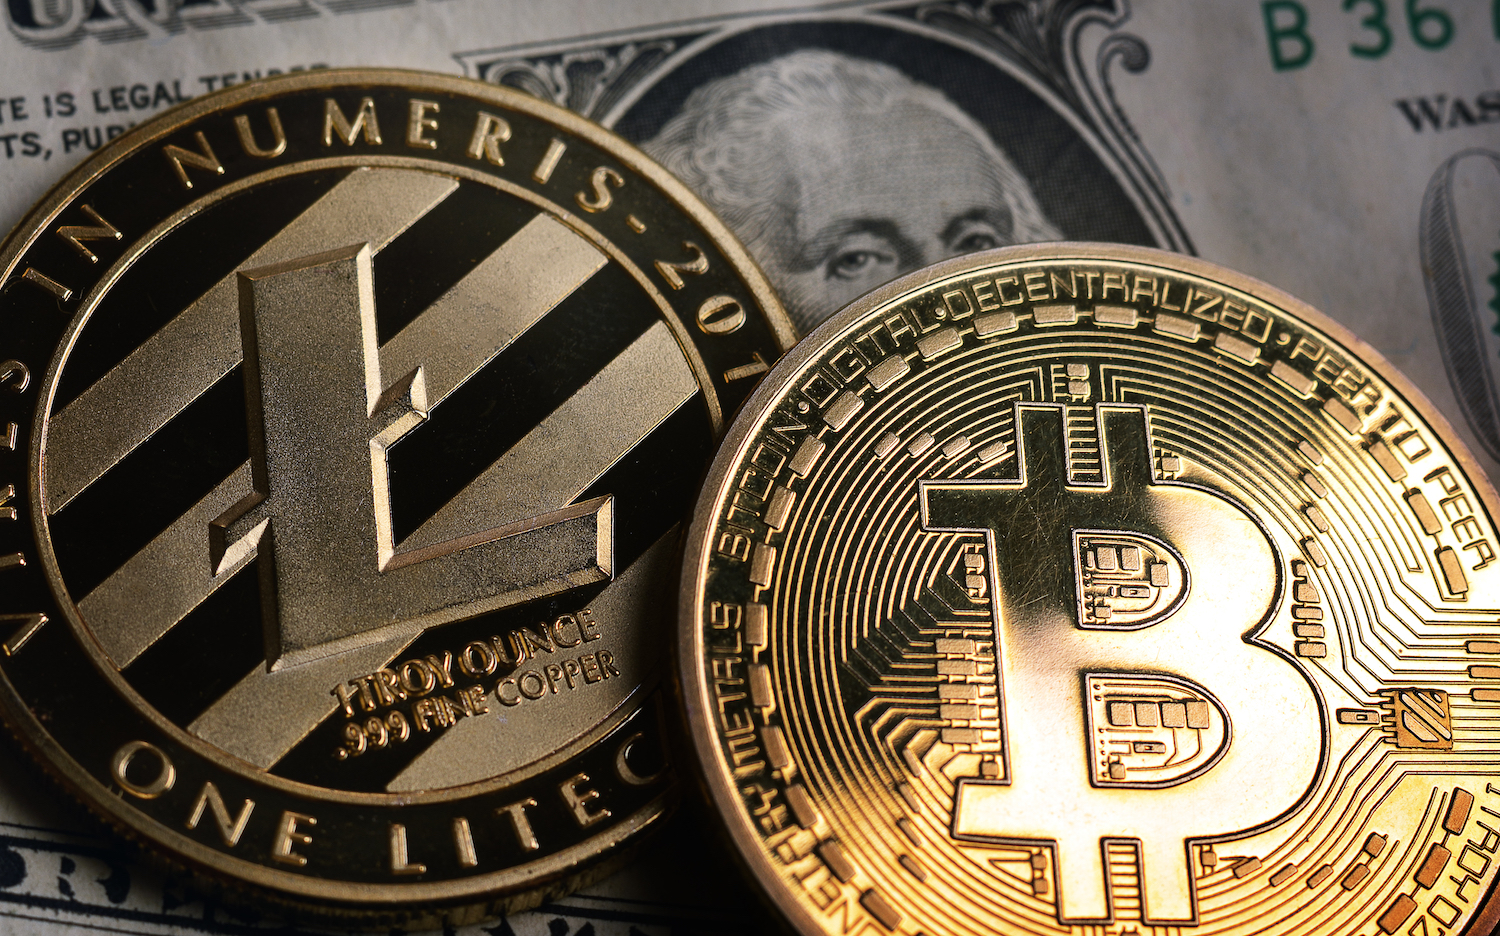 Litecoin Led Bitcoin’s Price Rally, Now It’s Hinting At A Pullback